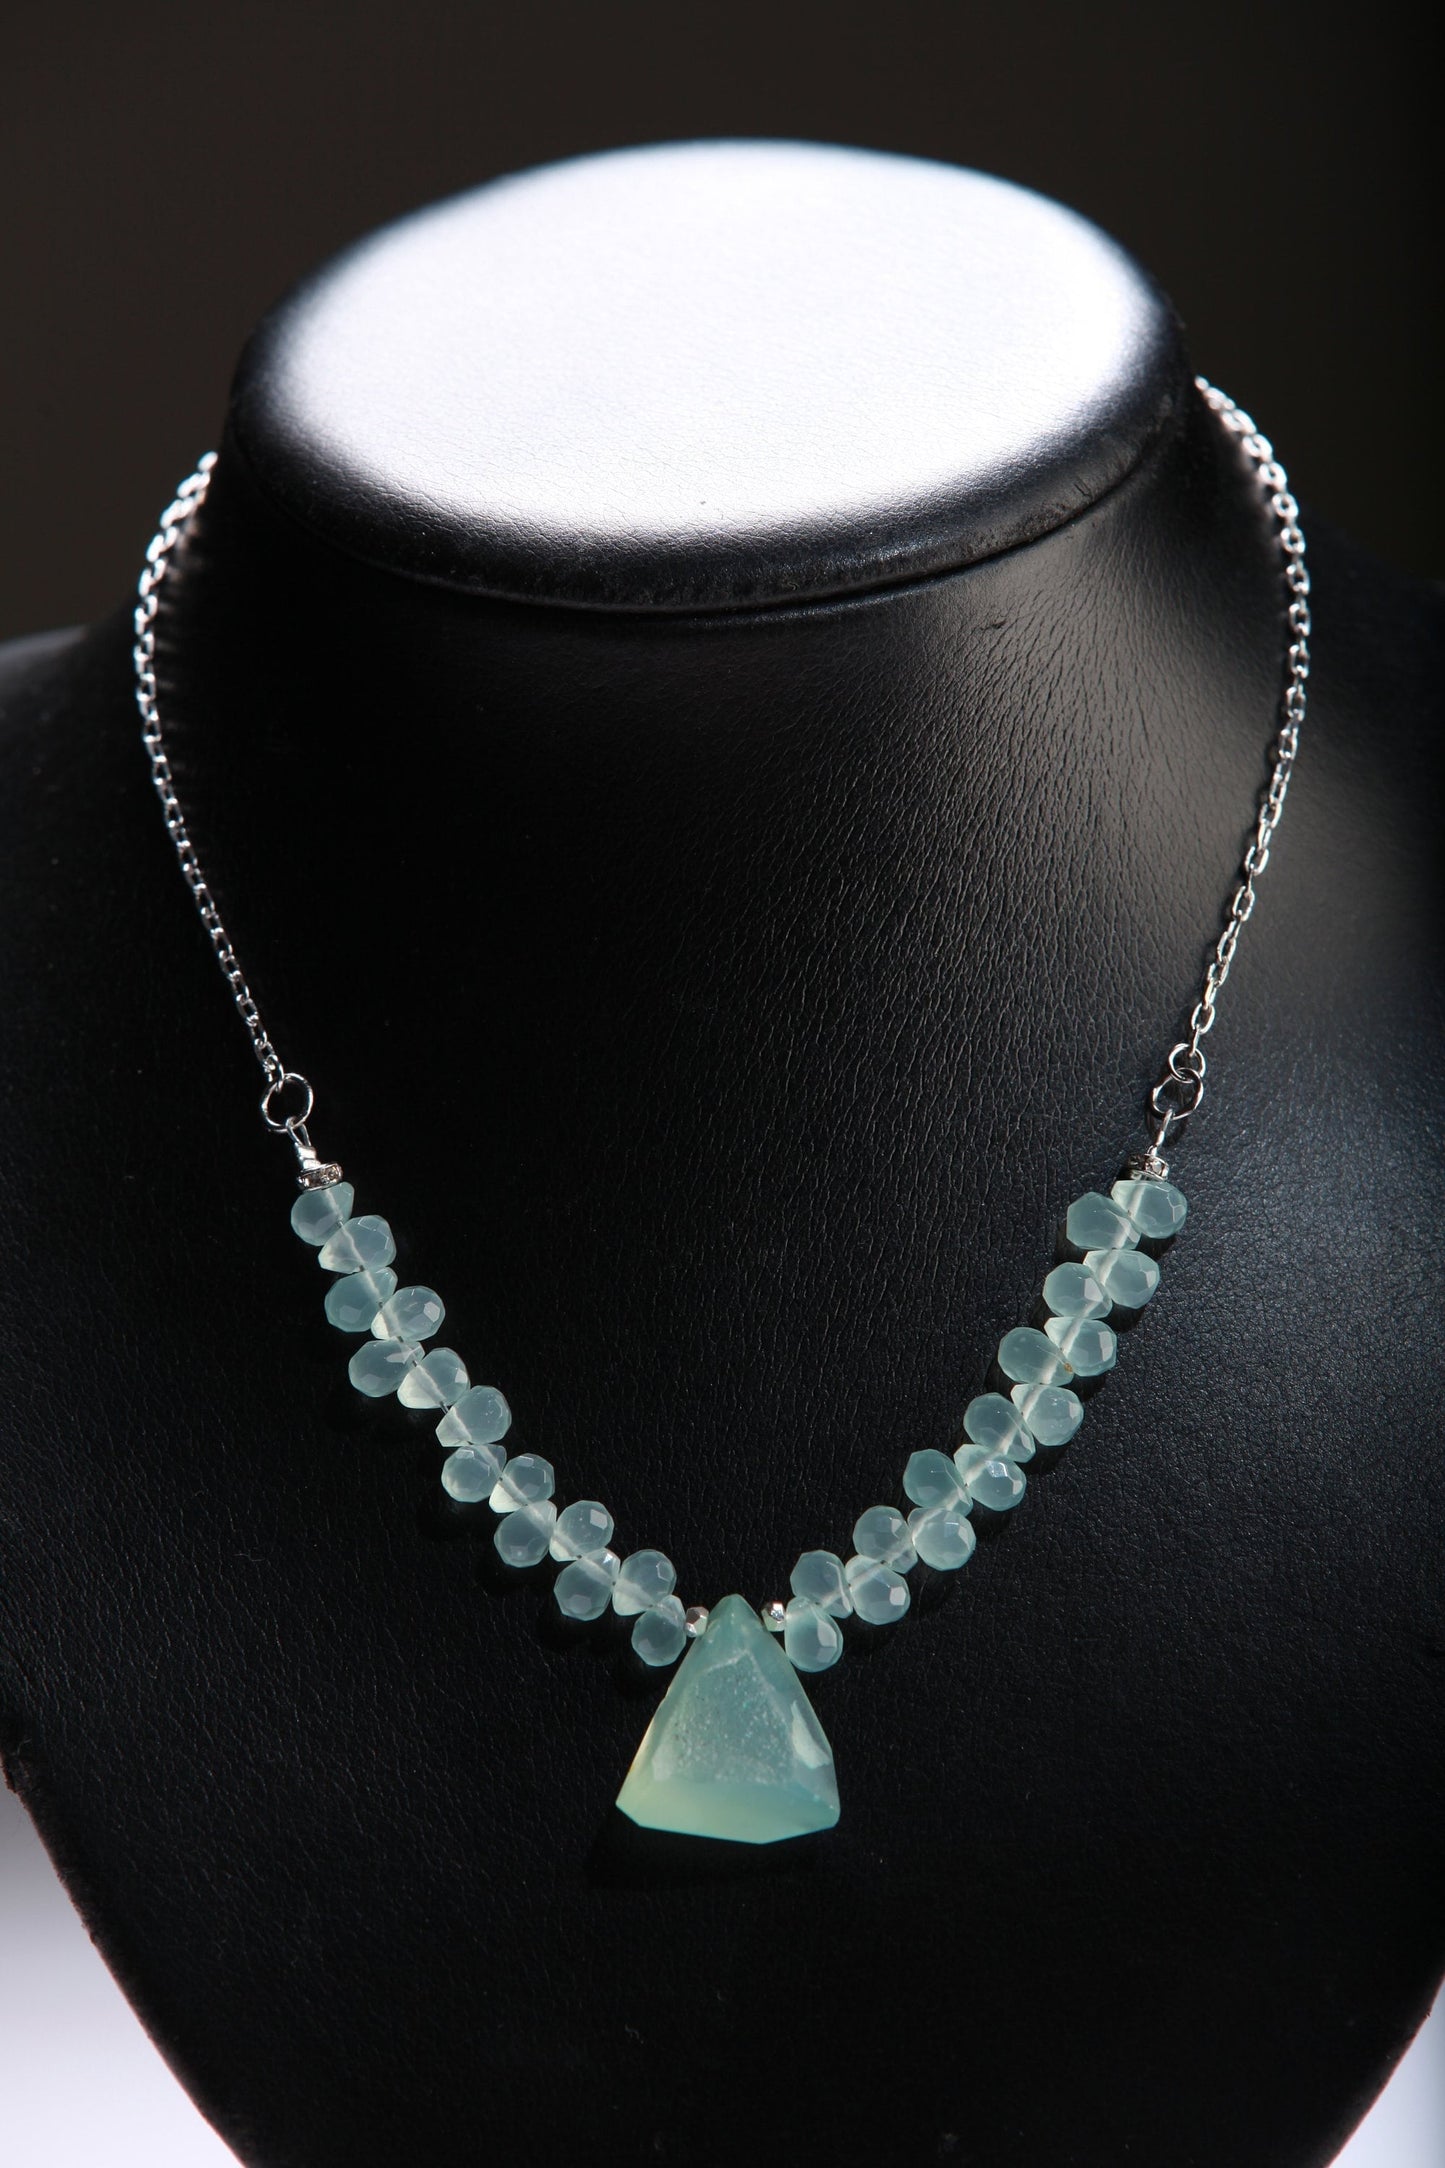 Natural Chalcedony Briolette Faceted Drop Accent with Stunning Chalcedony Raw Druzy Geode Pendant, 17&quot; Rhodium Necklace 2&quot; Extension Chain